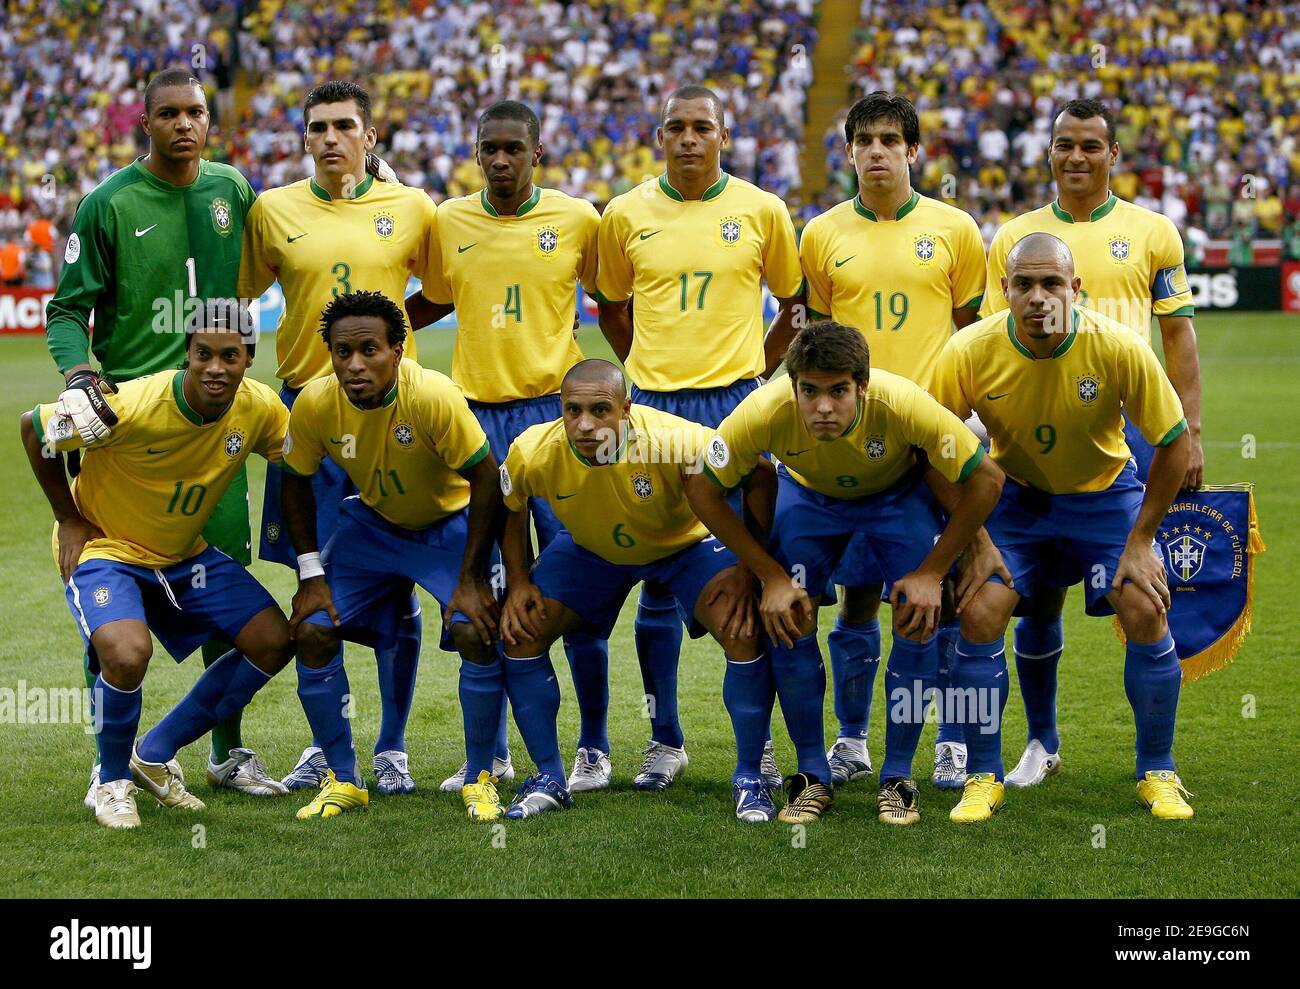 Brazil's soccer team during the World Cup 2006, quater-final, Brazil vs  France at the Commerzbank-Arena stadium in Frankfurt, Germany on July 1,  2006. France won 1-0 and advances to World Cup semifinals.